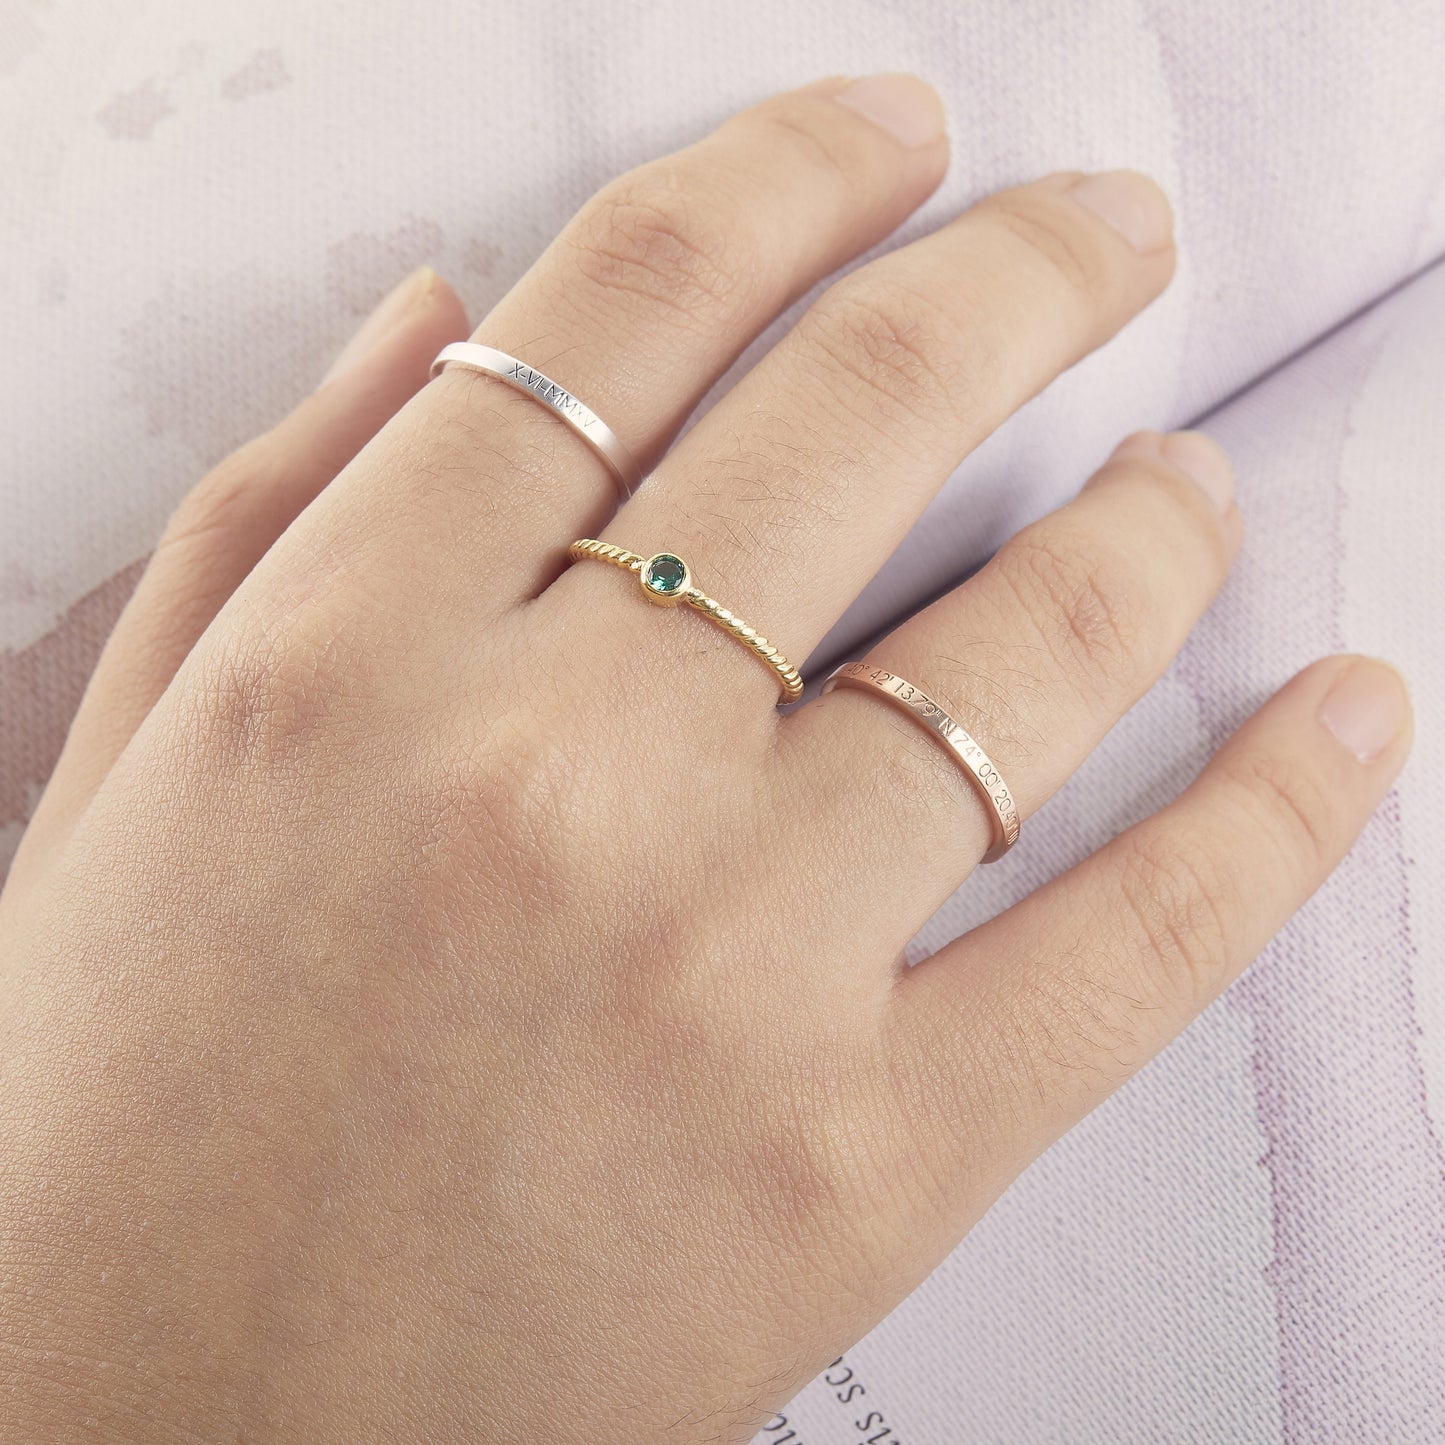 Custom Coordinate Ring | Engraved Dainty Ring | Name Ring | Promise Ring | Stackable Ring | Stacking Ring | Family Ring | Minimalist Ring